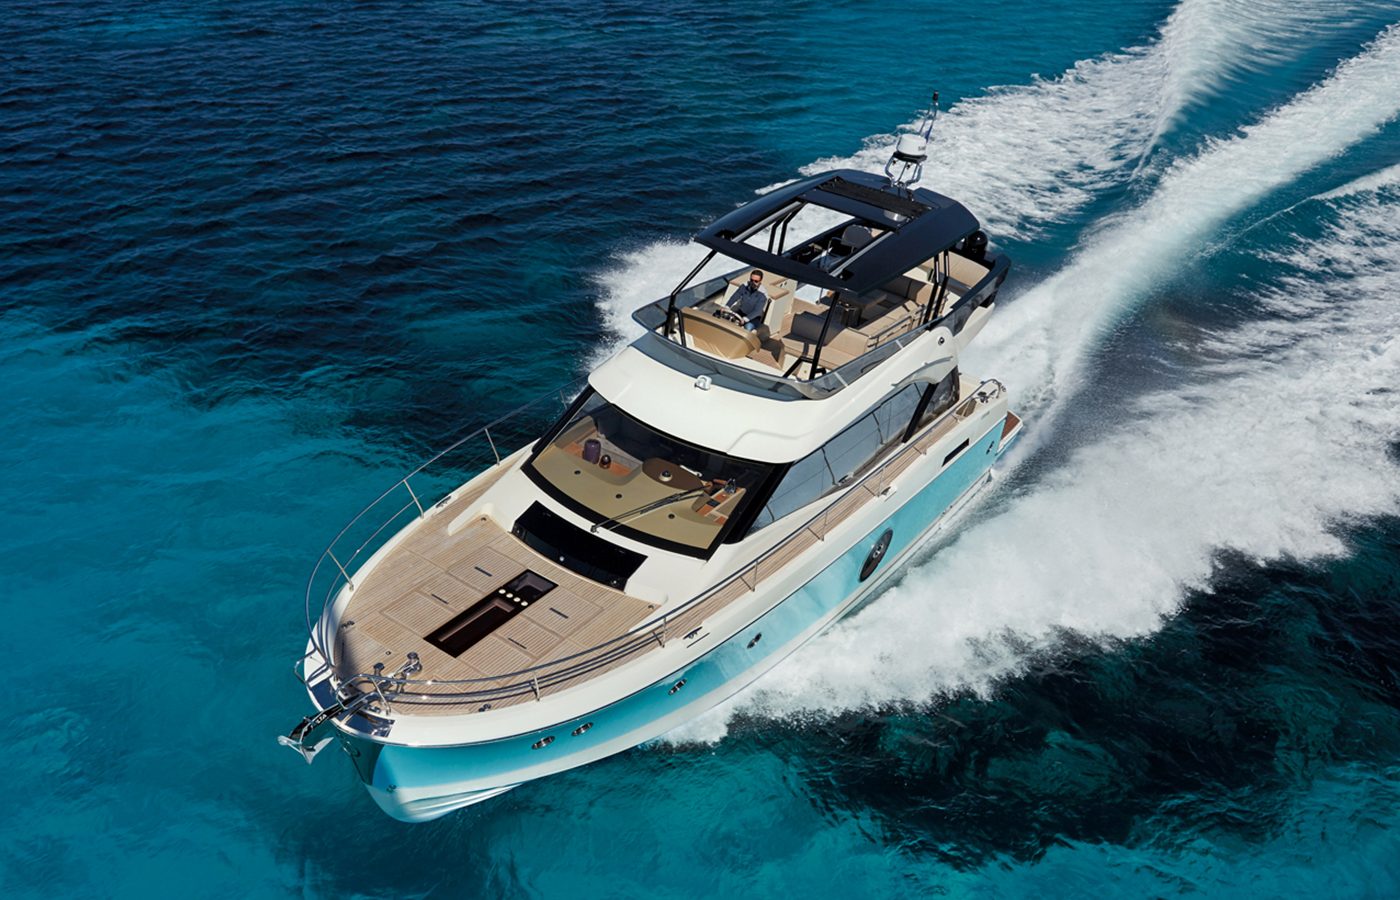 The Monte Carlo 6: A Motoryacht Unlike Any Other